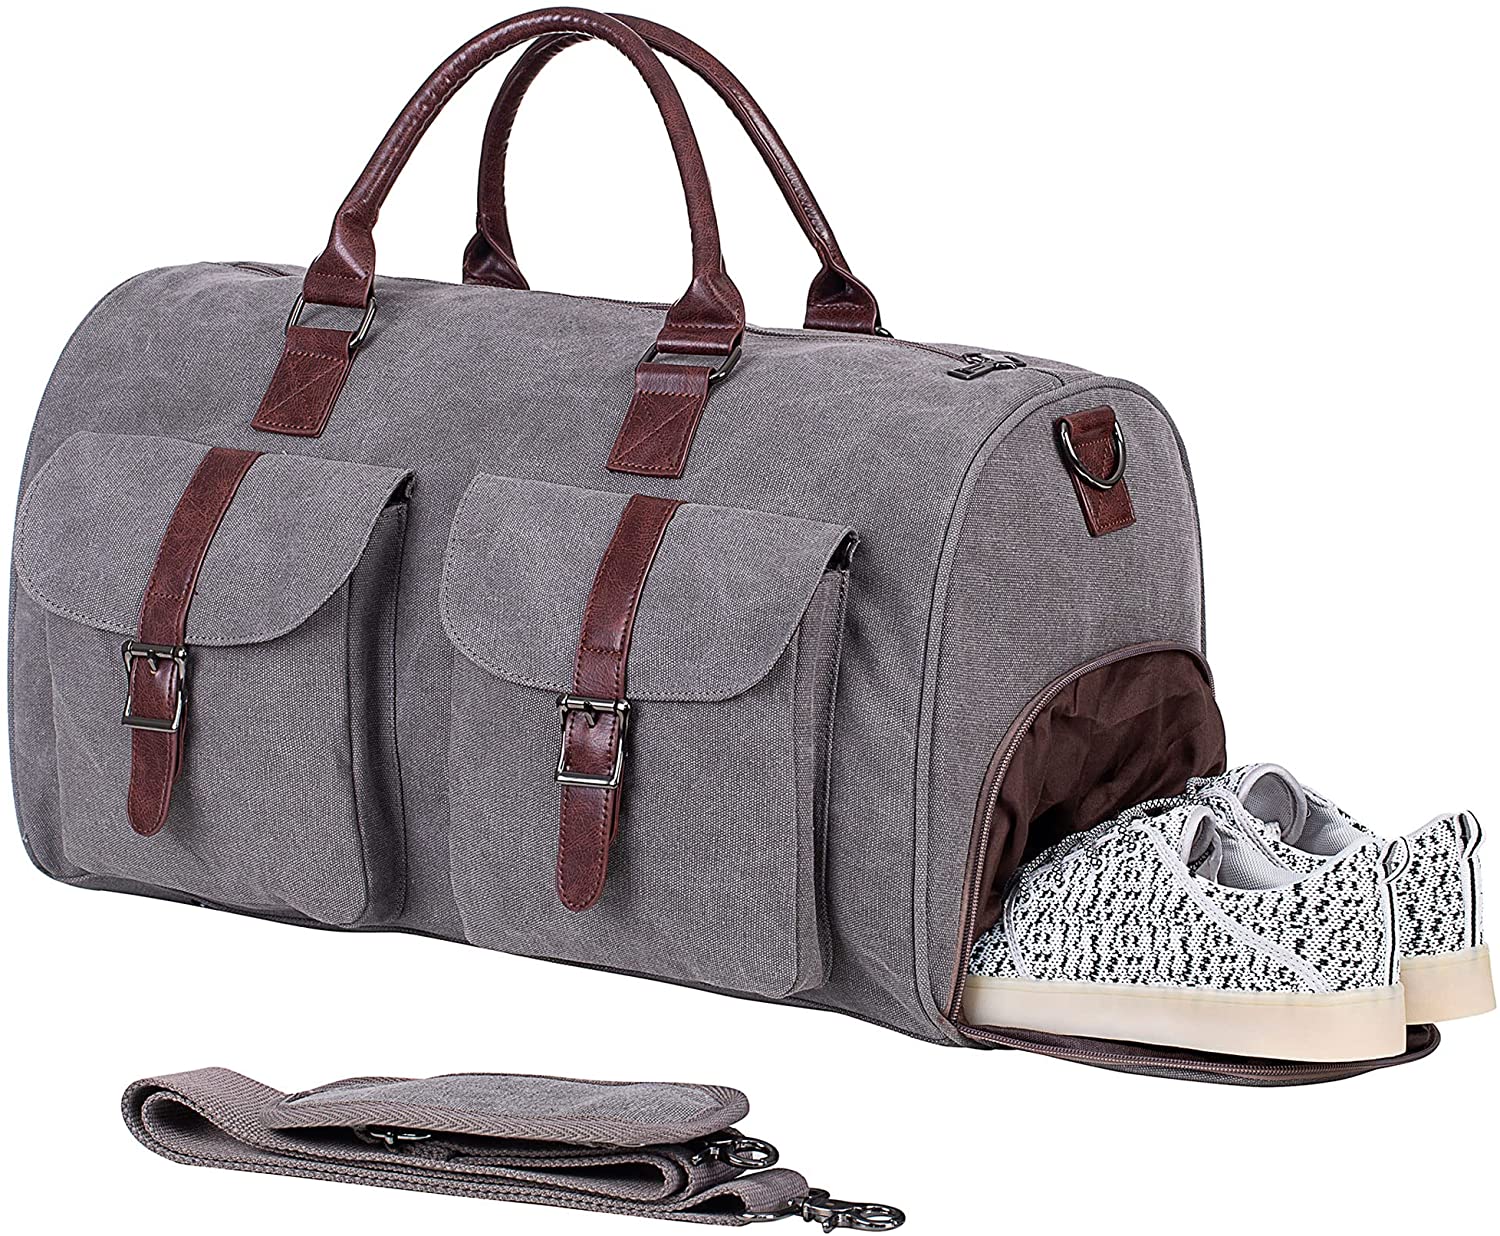 This weekender bag has compartments for your shoes, laptop and clothes —  and it's less than $50